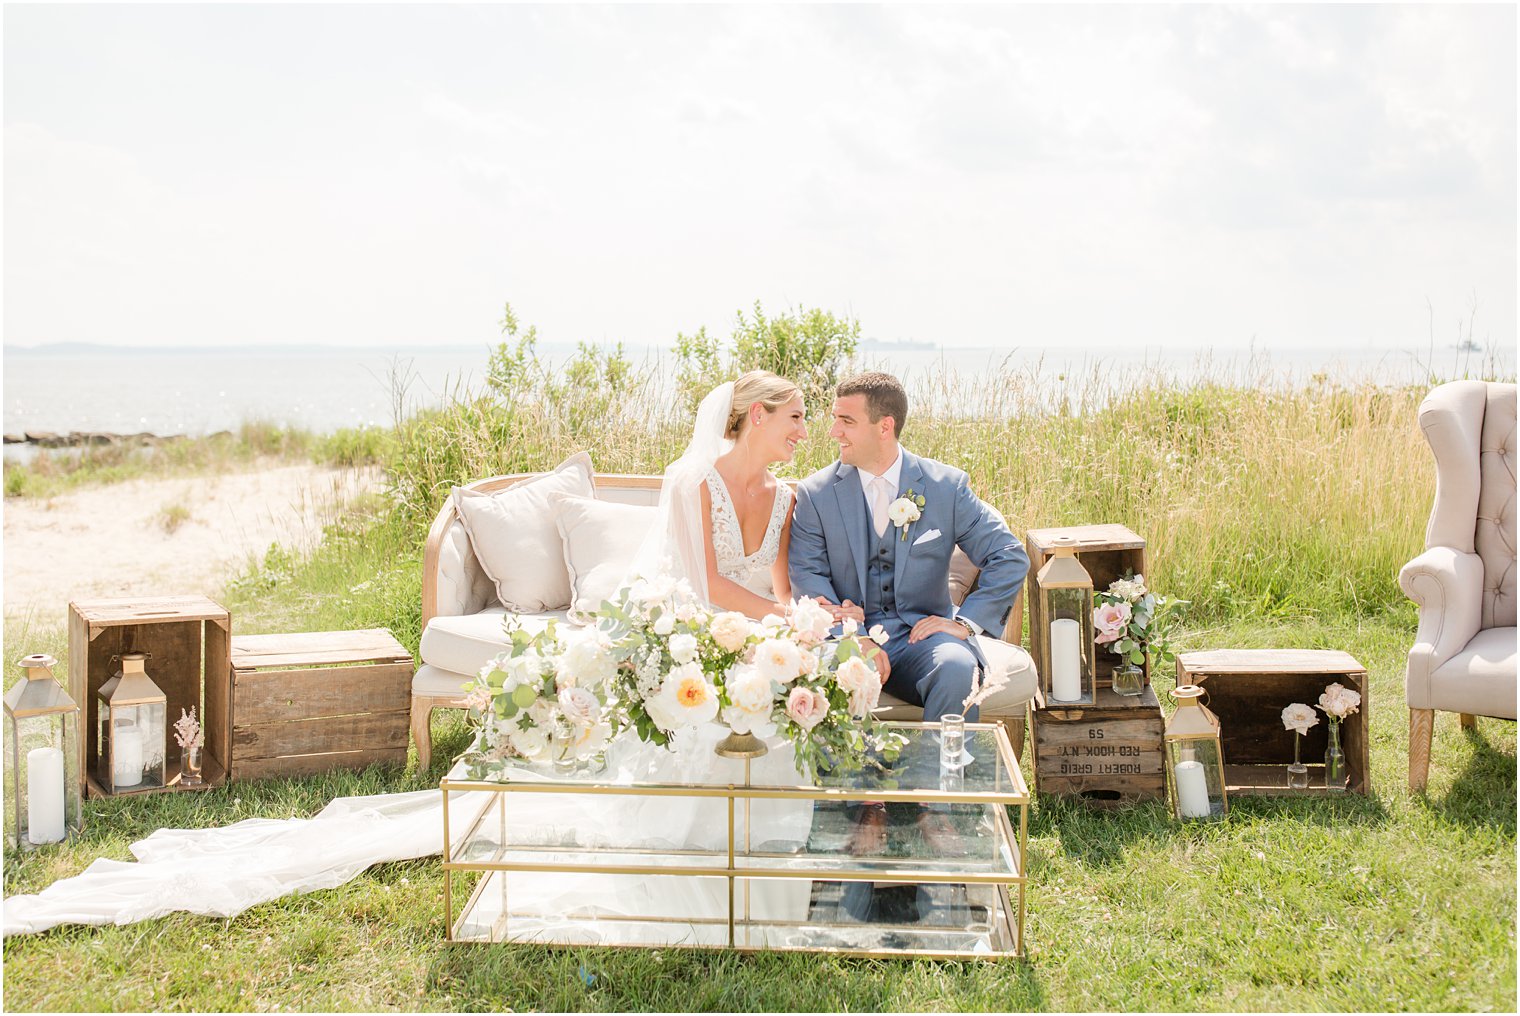 Sandy Hook Chapel wedding day with outdoor reception seating by Idalia Photography